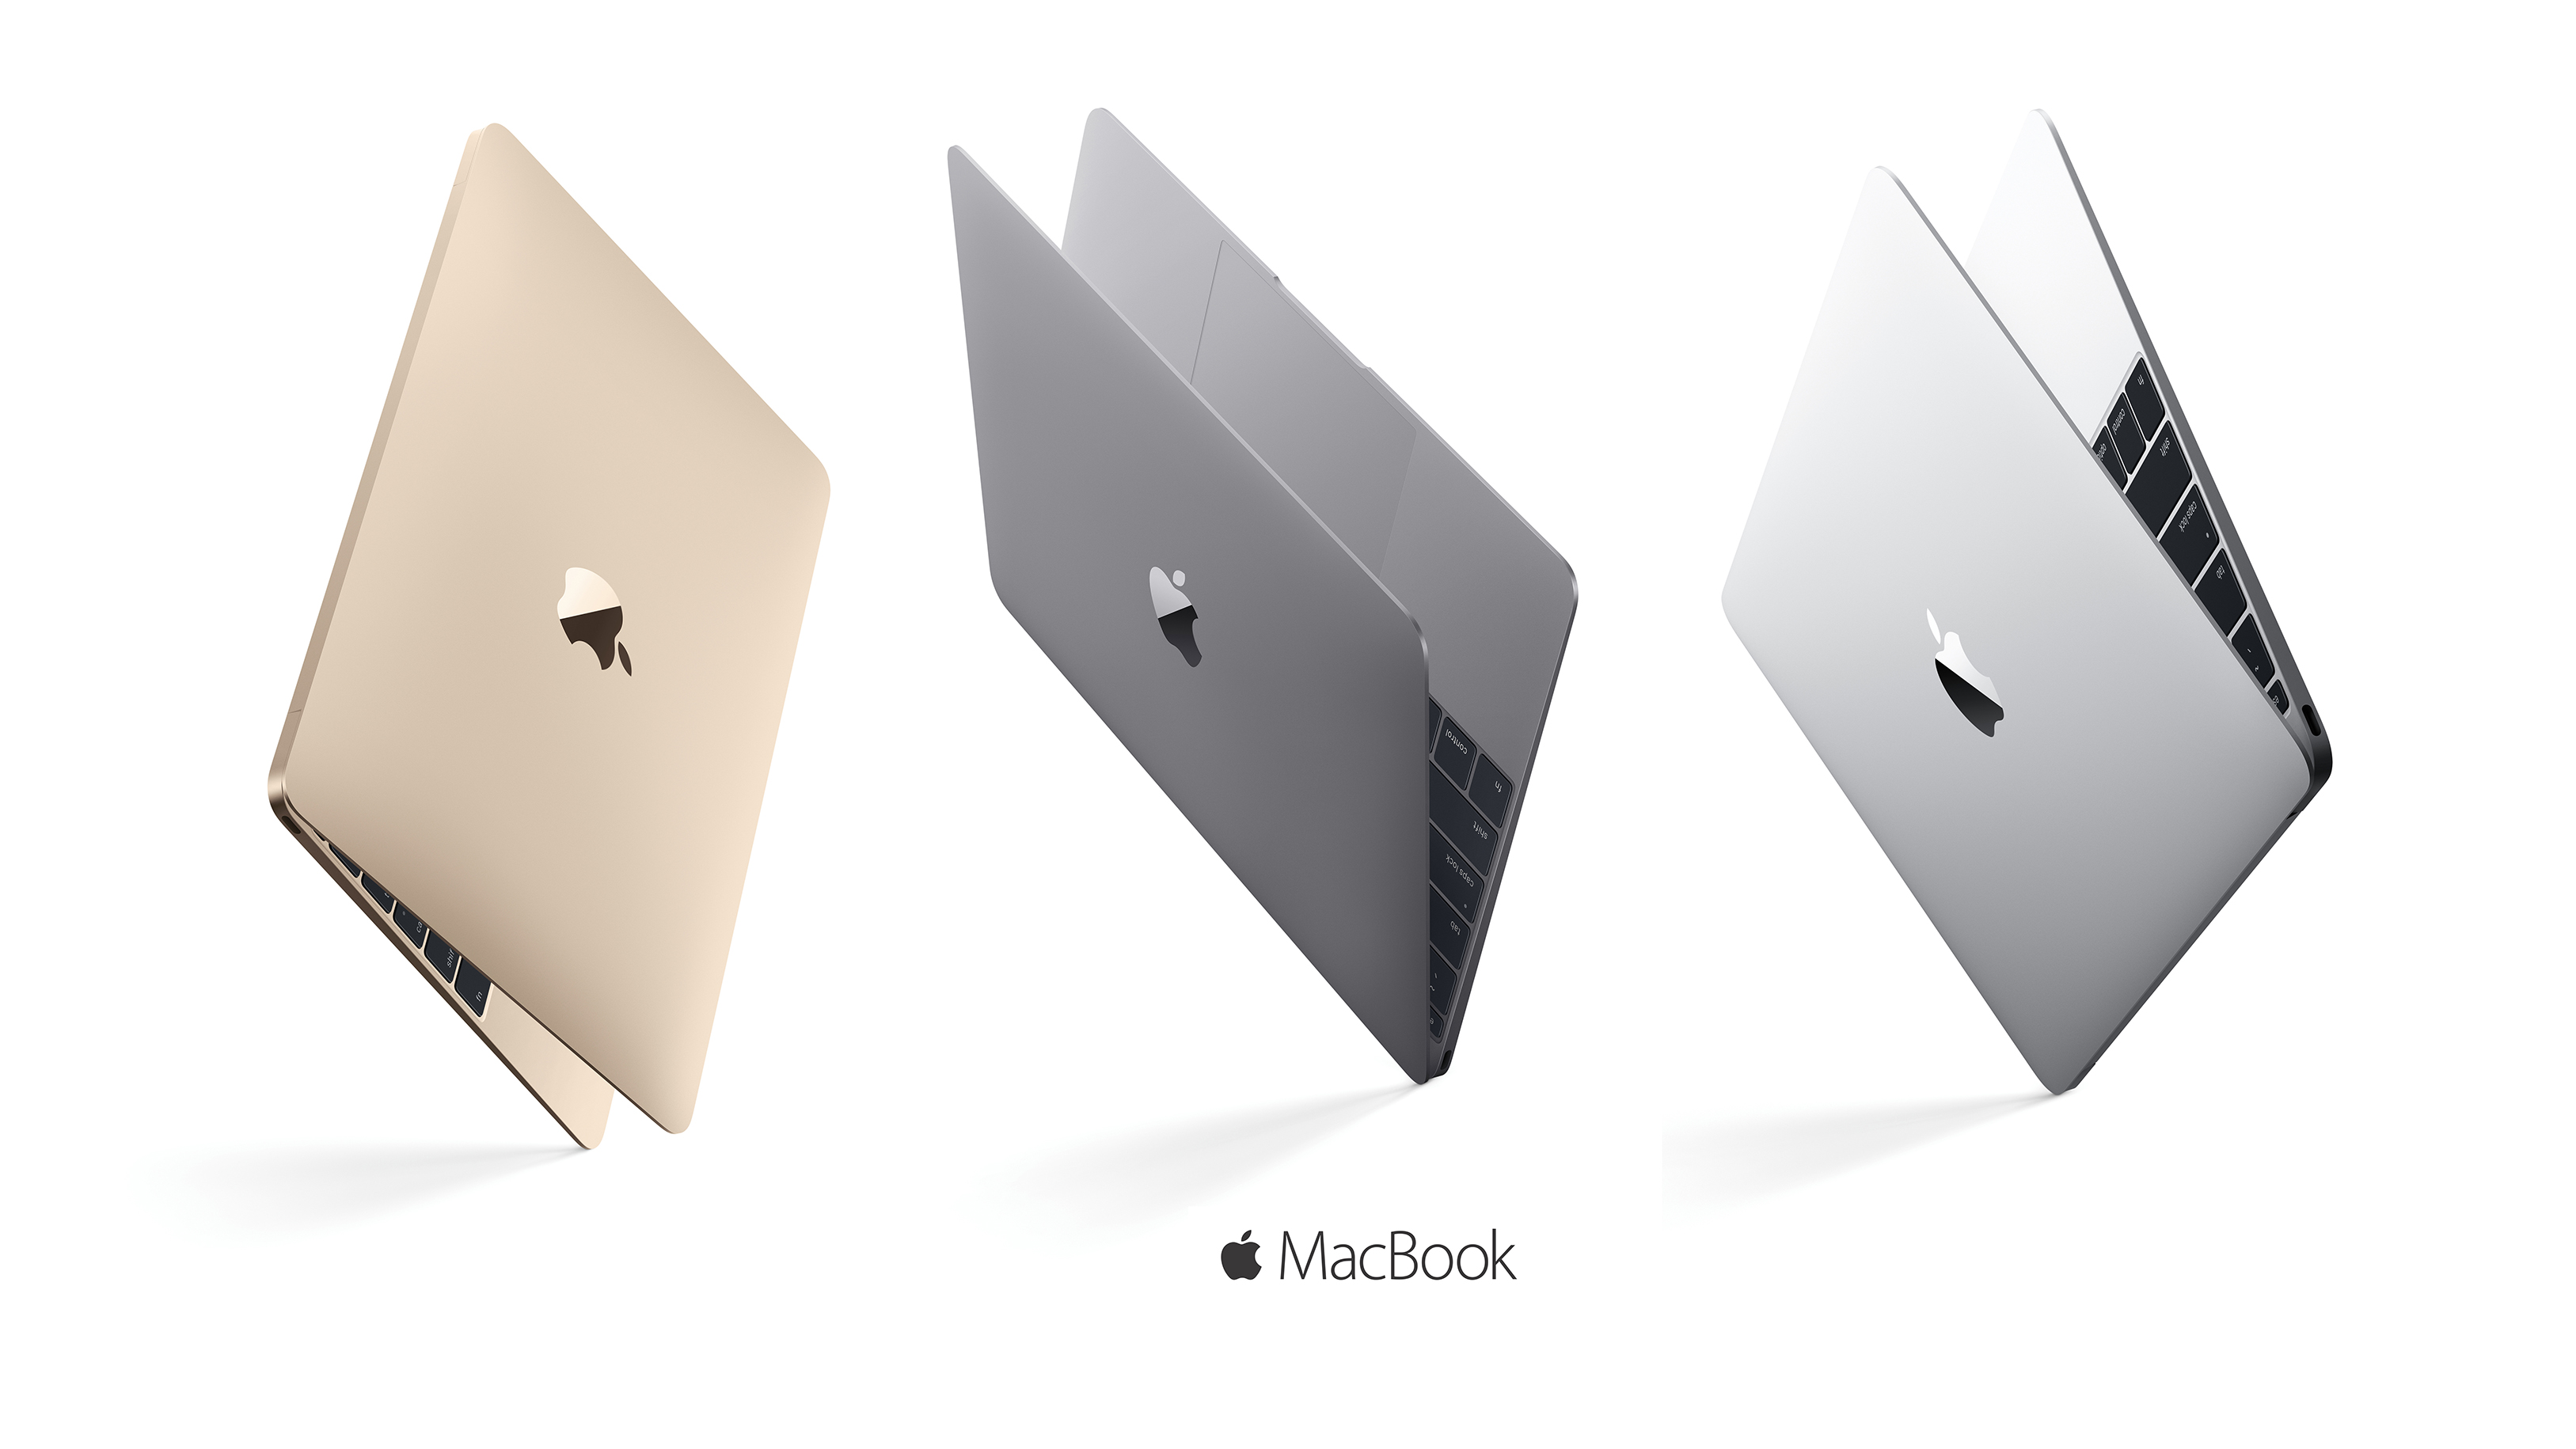 The 12 Inch Macbook Introduced In 15 Is Now Considered Vintage By Apple 9to5mac